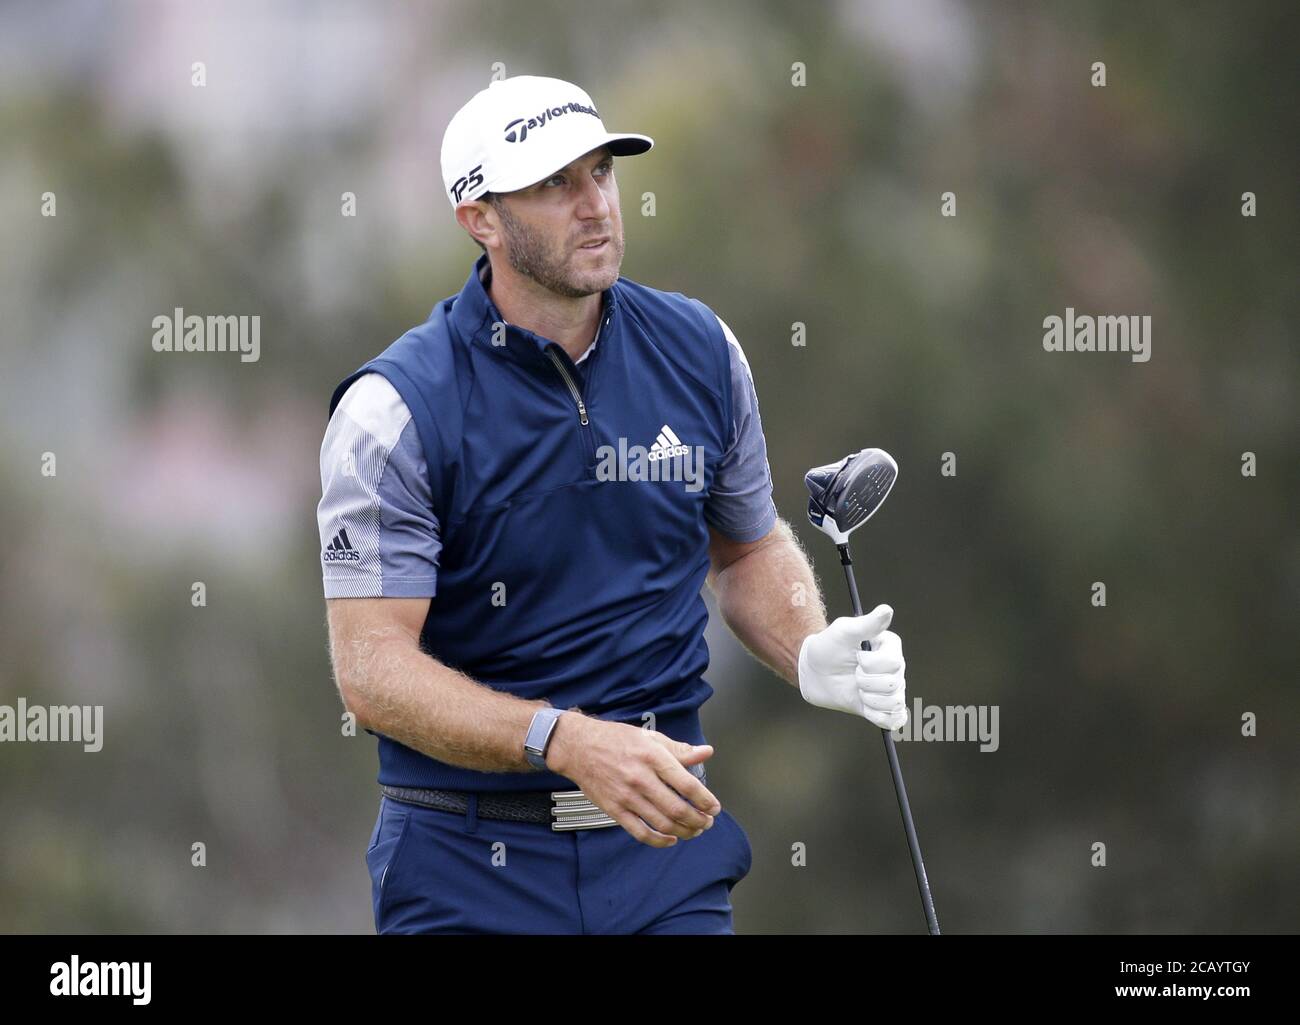 San Francisco, United States. 09th Aug, 2020. Dustin Johnson watches his tee shot on the 4th hole in the final round of the 102nd PGA Championship at TPC Harding Park in San Francisco on Sunday, August 9, 2020. Photo by John Angelillo/UPI Credit: UPI/Alamy Live News Stock Photo